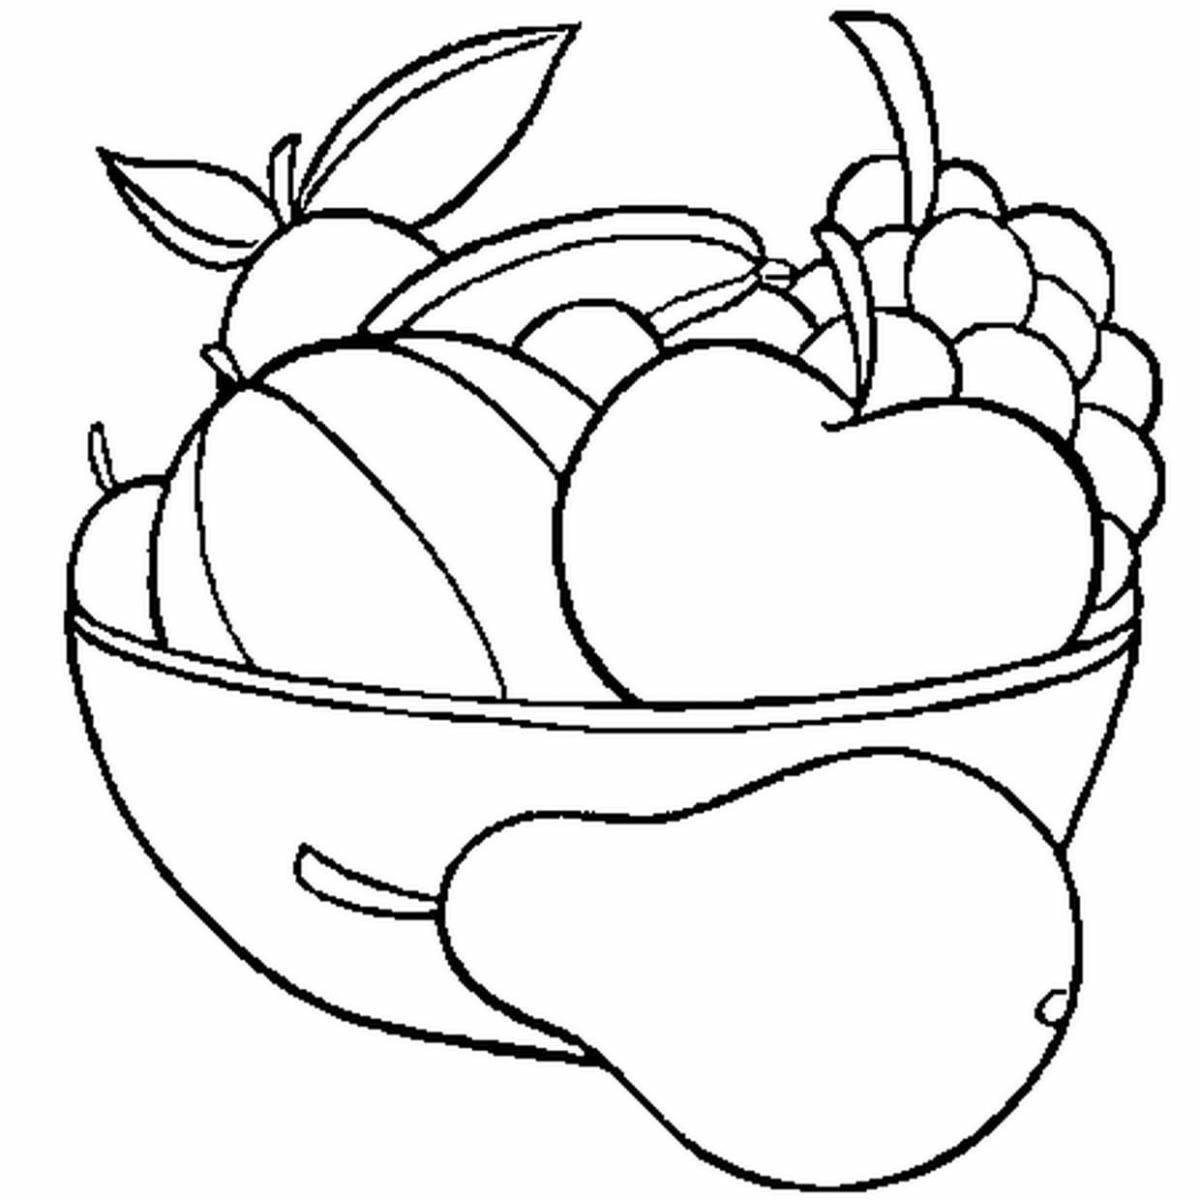 Fruit plate fun coloring book for kids